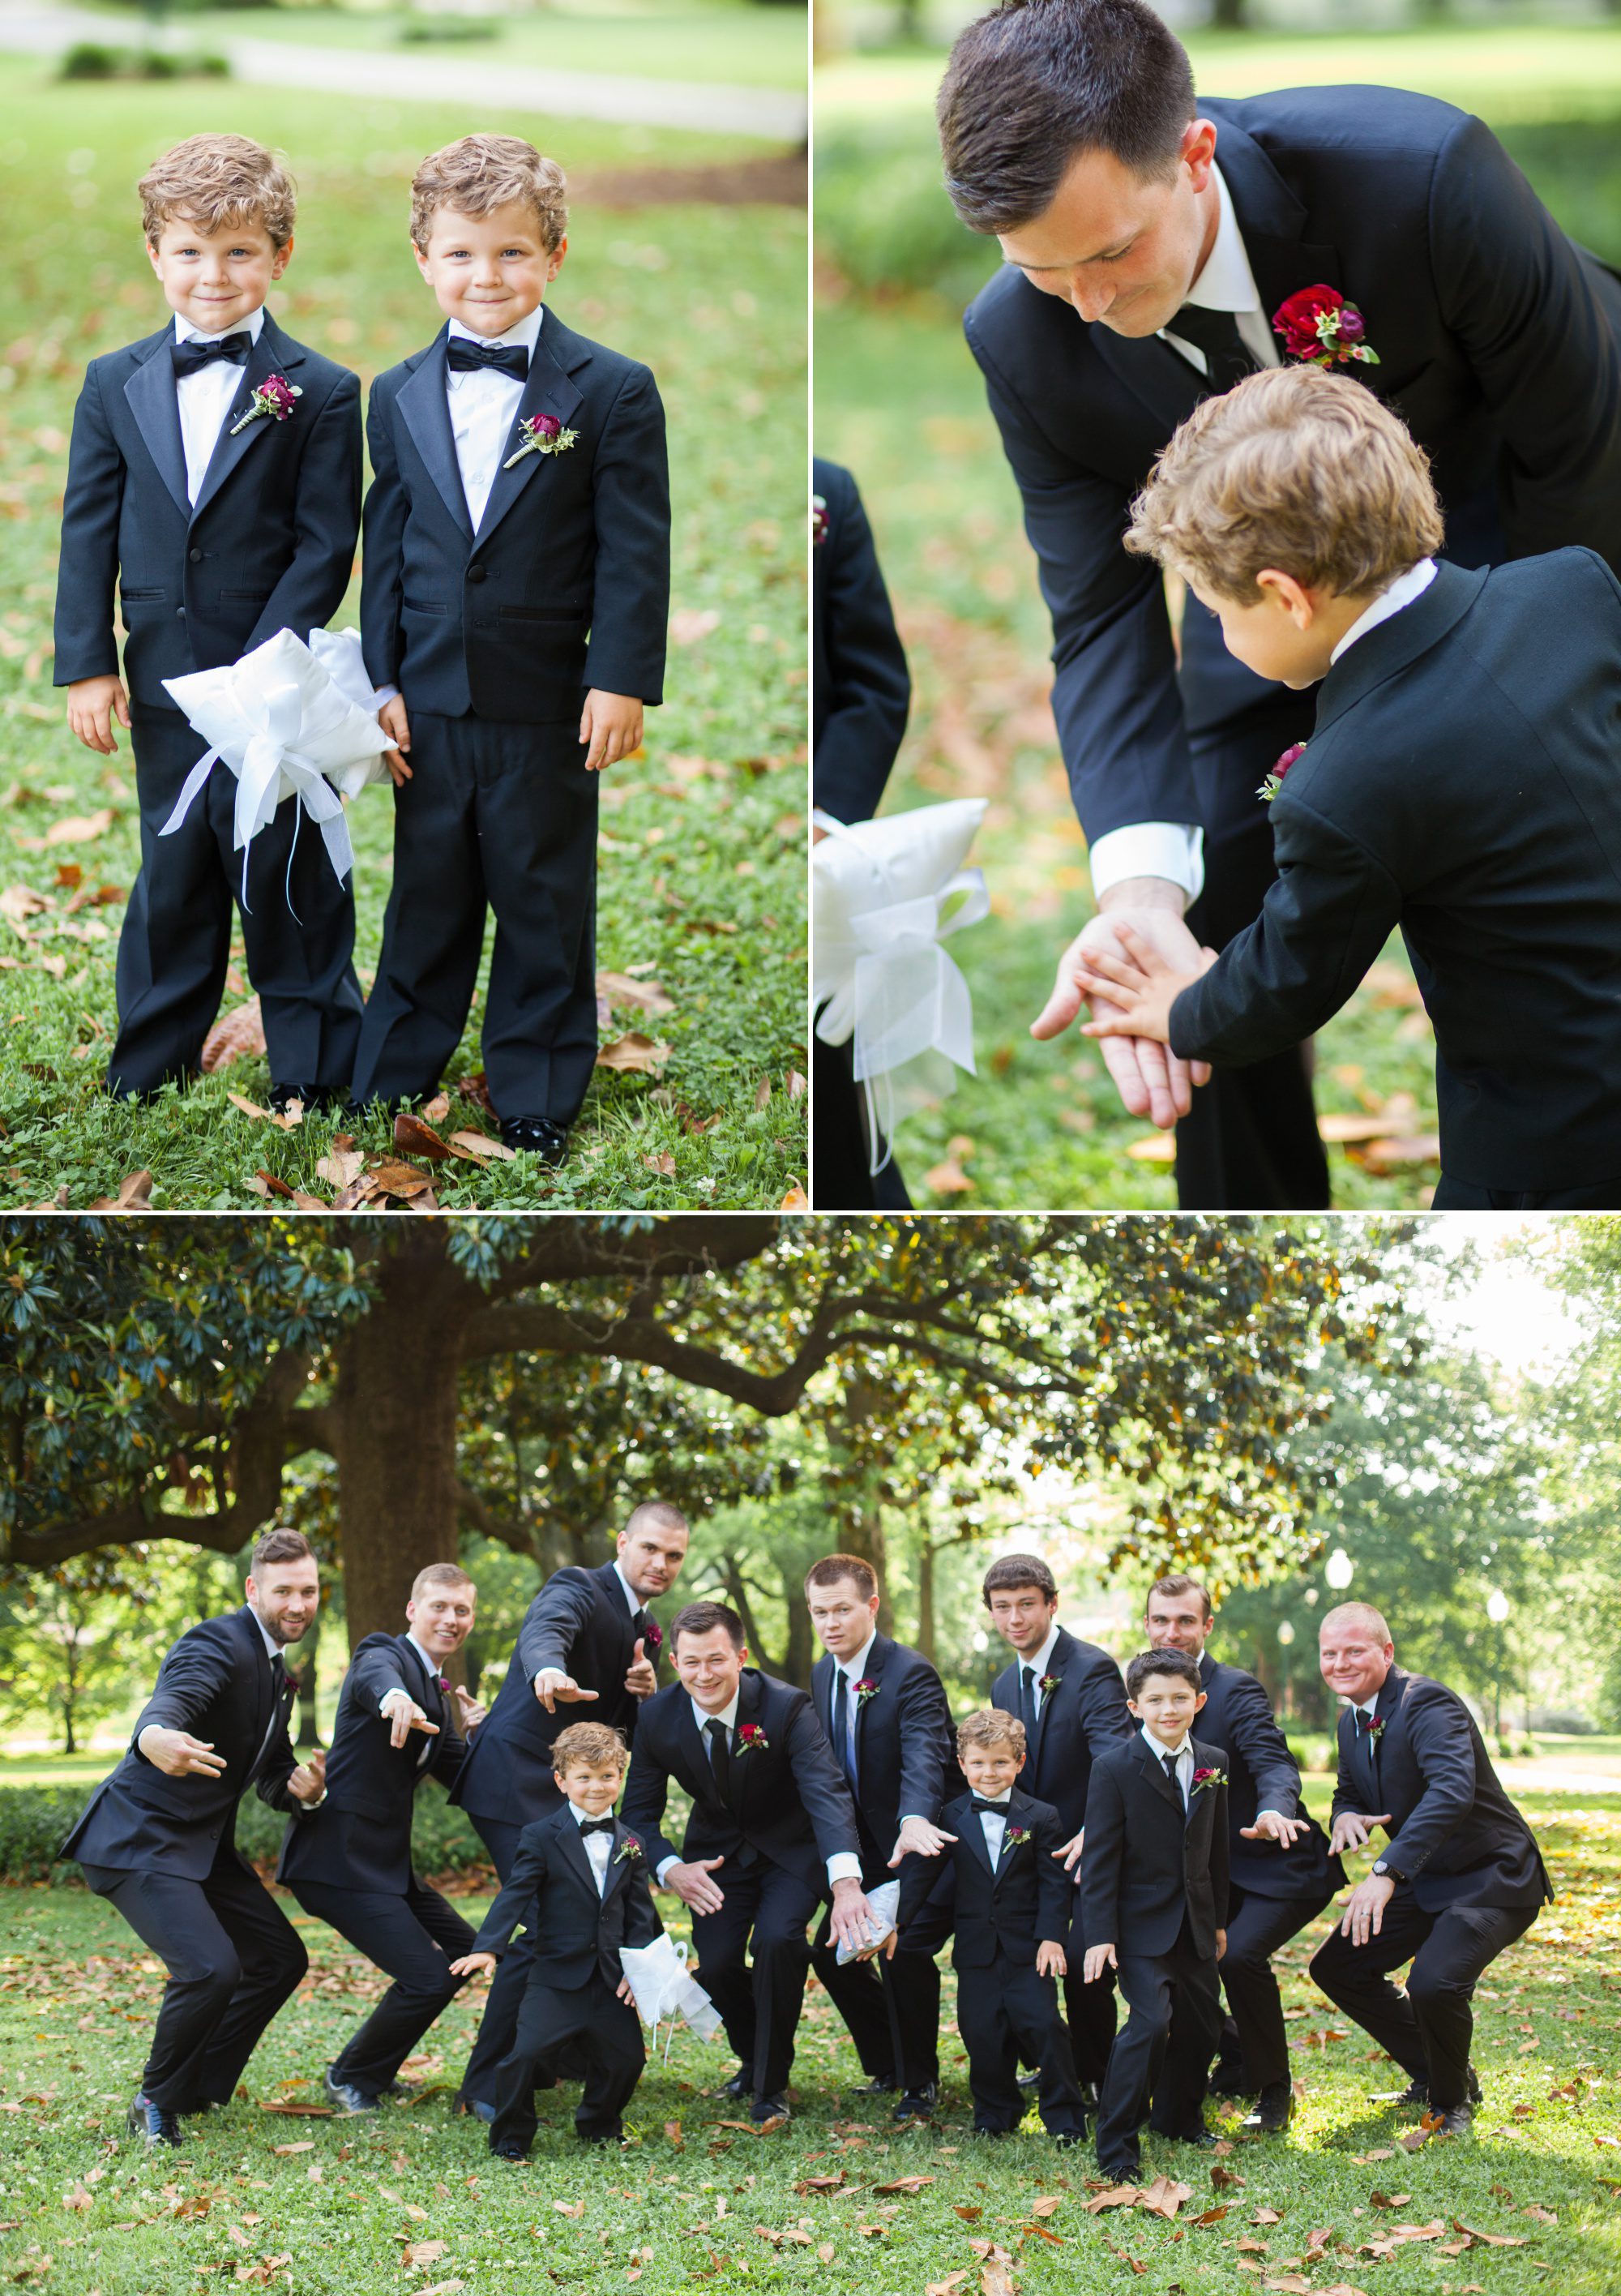 Groomsmen and ring bearers before wedding ceremony at Riverwood Mansion in Nashville, Tennessee. Photography by Krista Lee.